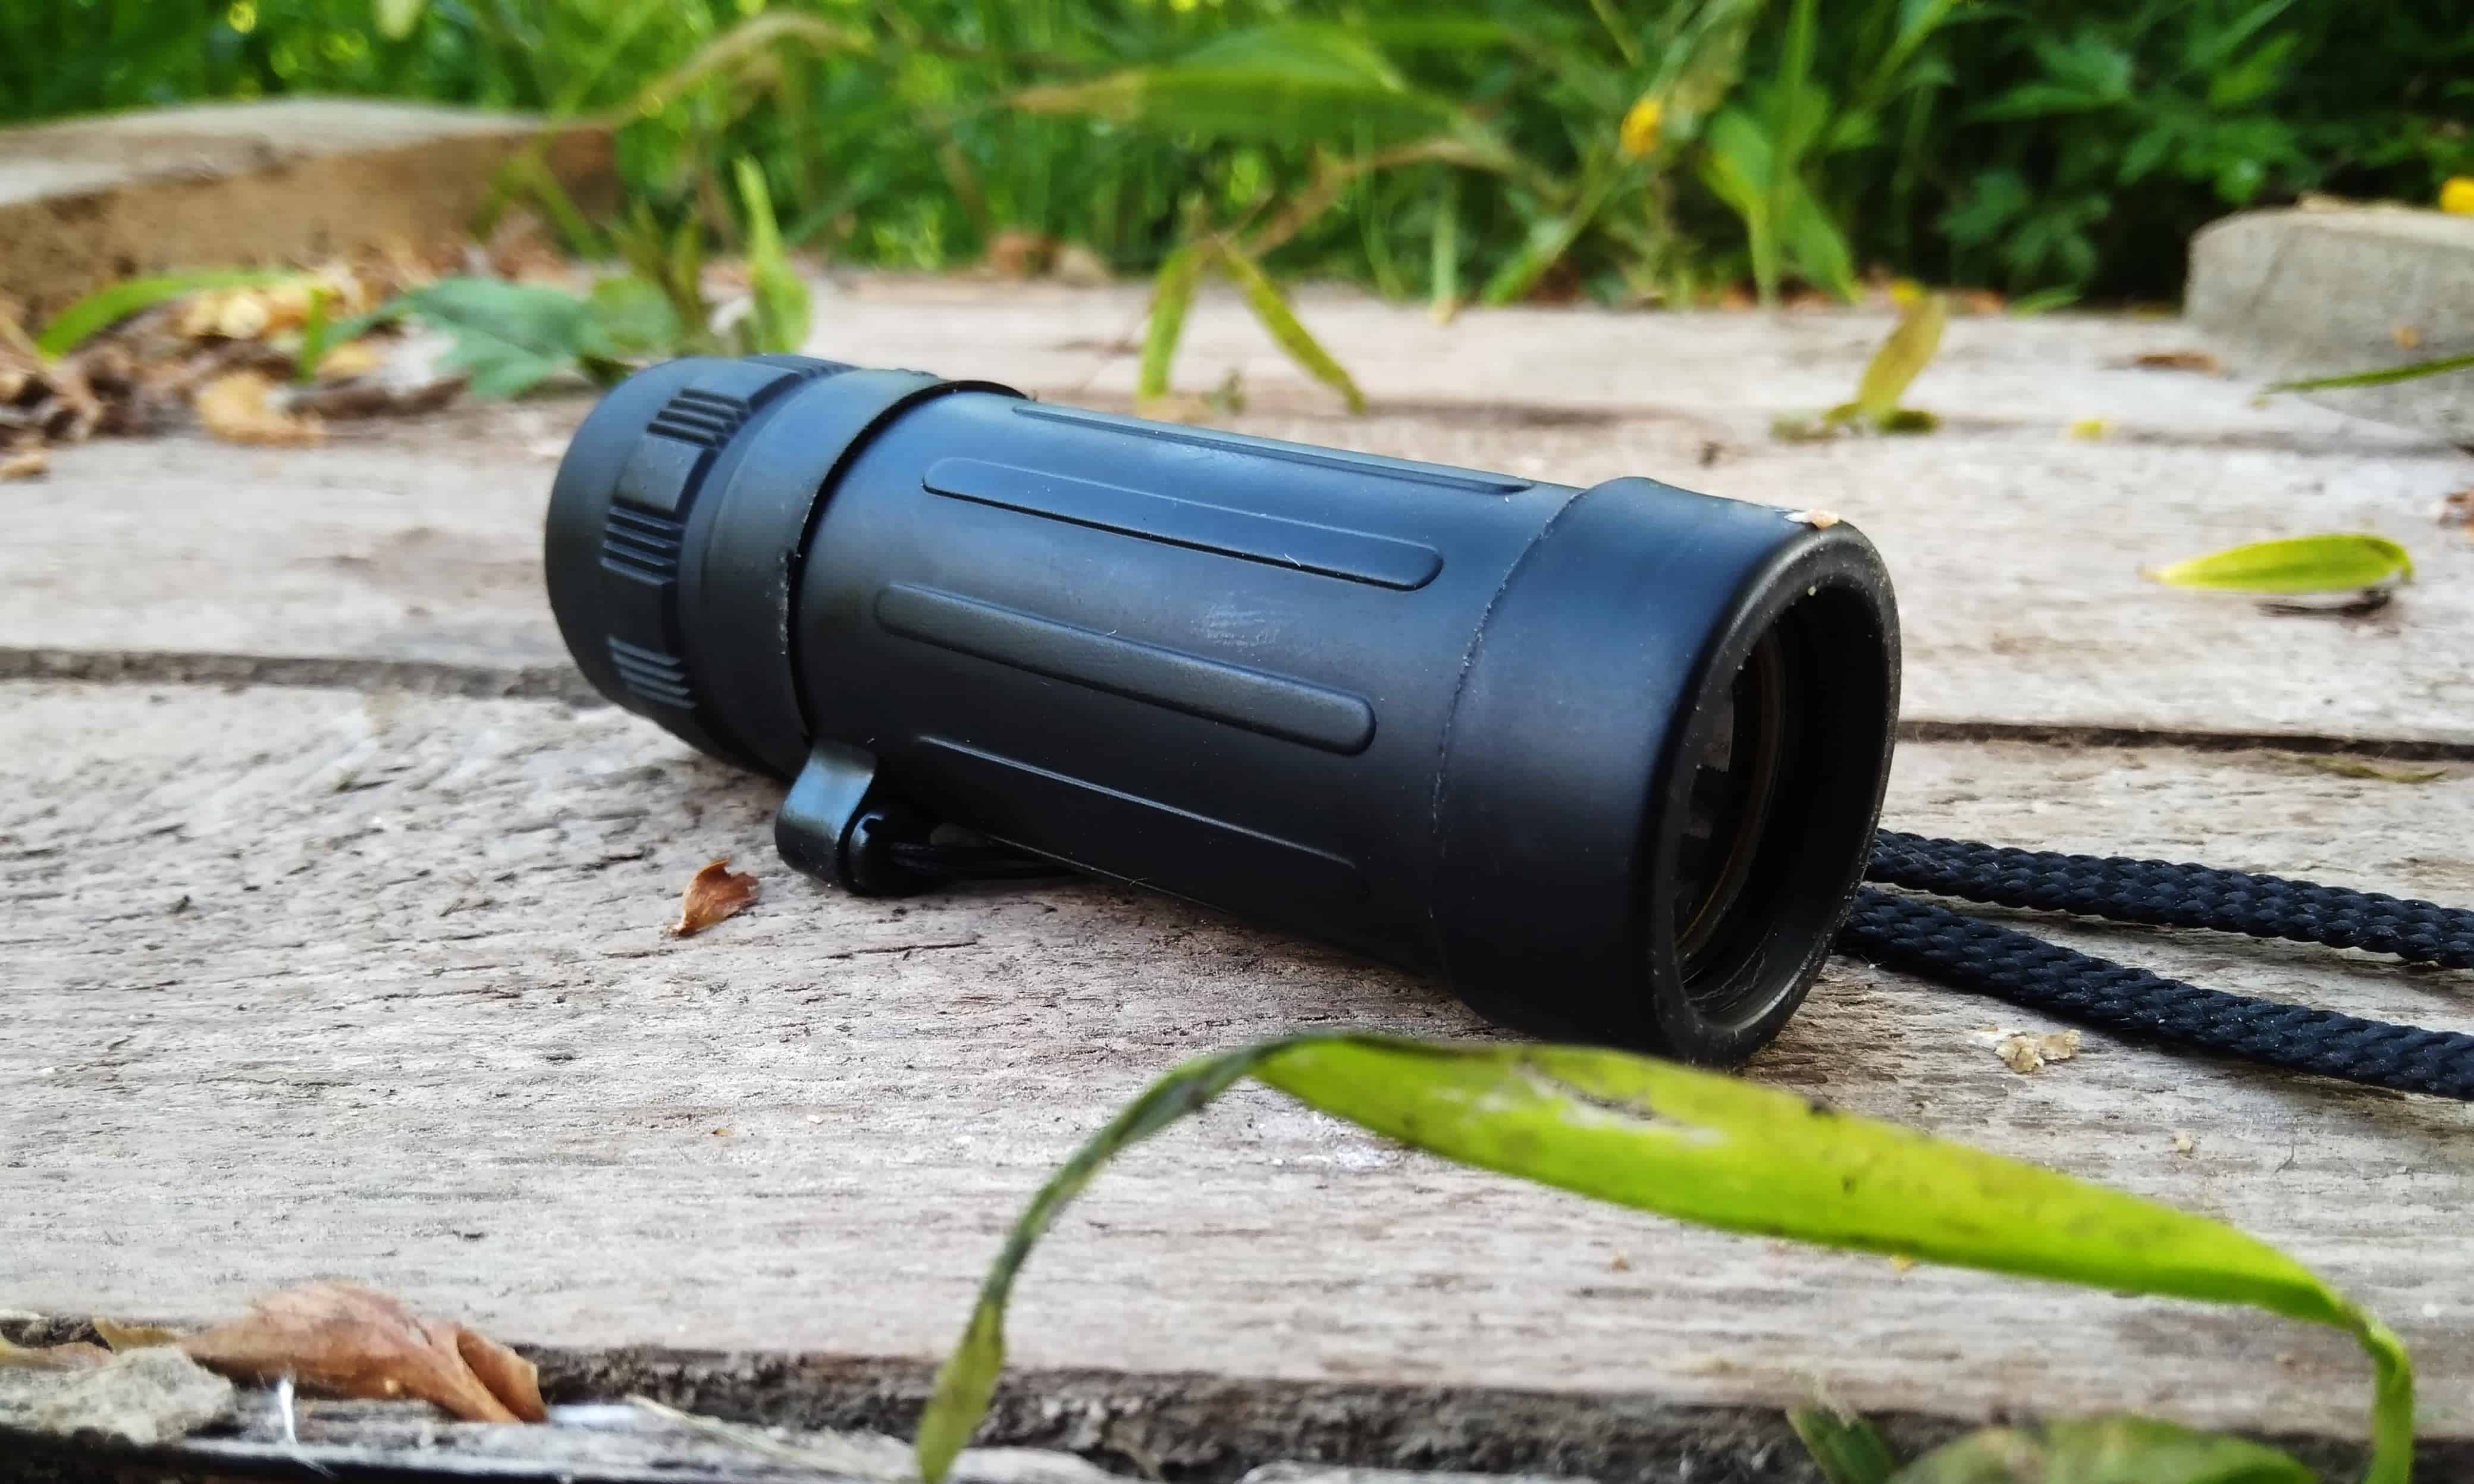 Monocular outdoors on wooden table